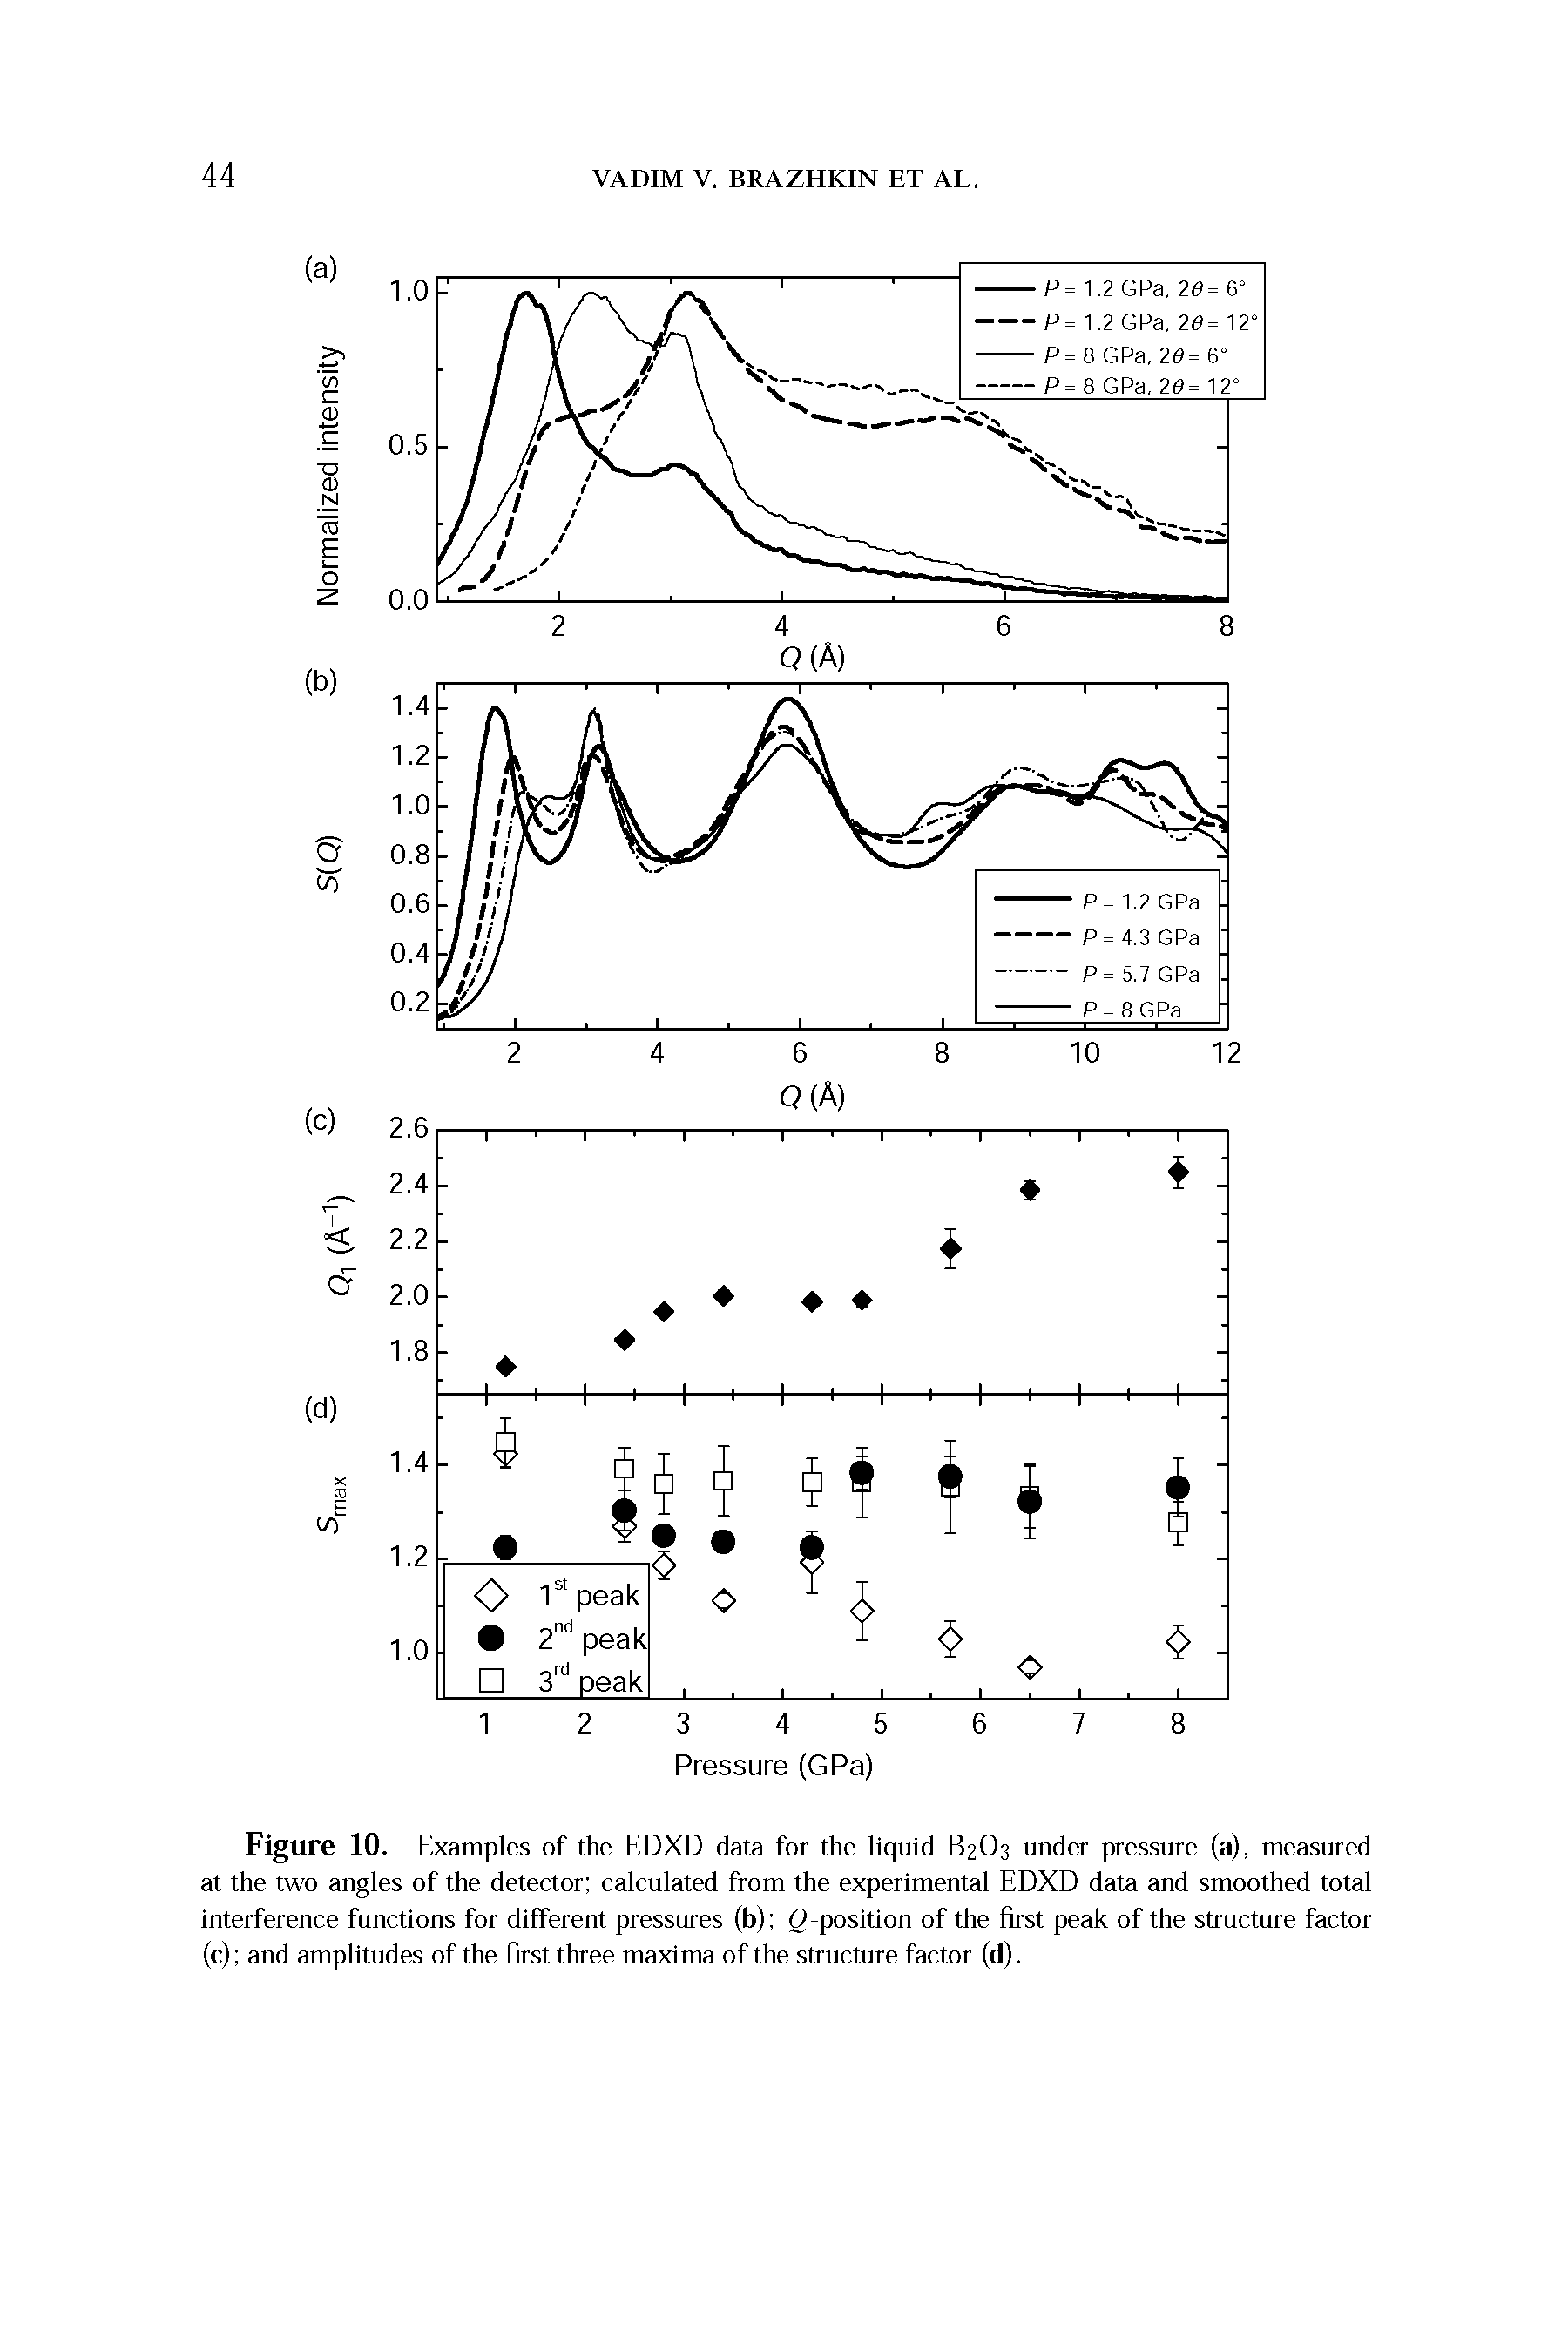 Figure 10. Examples of the EDXD data for the liquid B2O3 under pressure (a), measured at the two angles of the detector calculated from the experimental EDXD data and smoothed total interference functions for different pressures (b) G "position of the first peak of the structure factor (c) and amplitudes of the first three maxima of the structure factor (d).